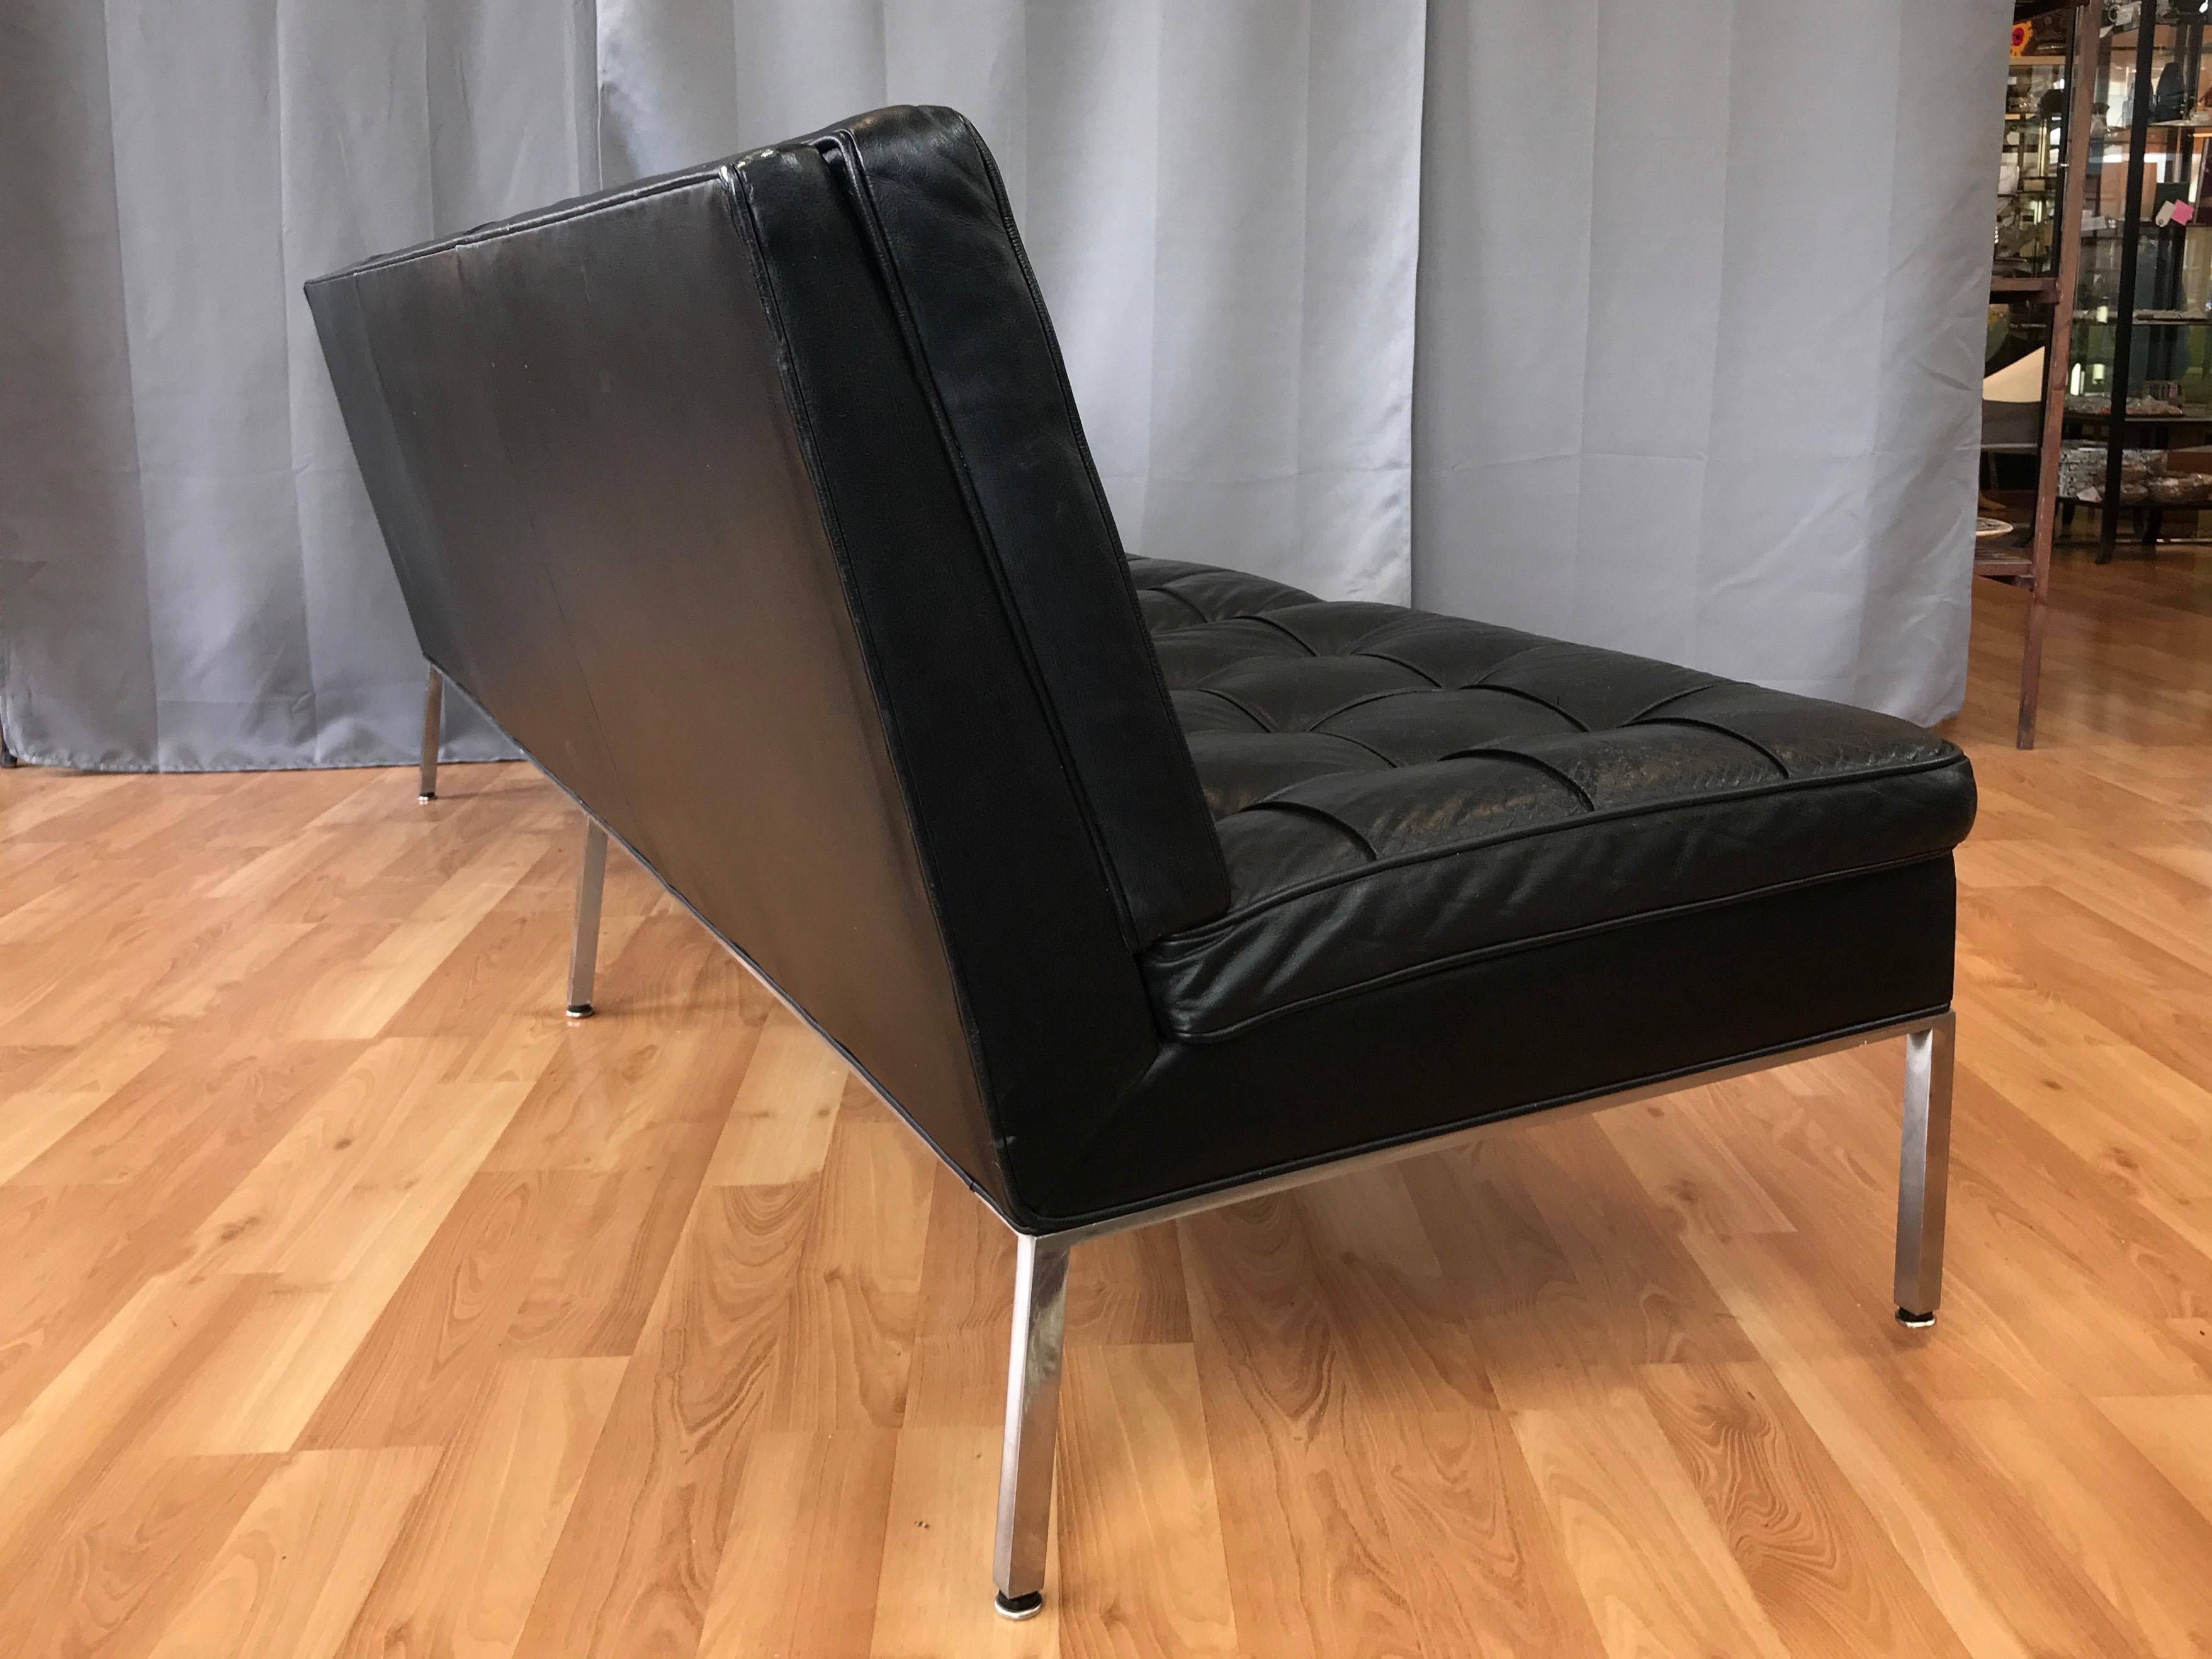 Polished Steelcase Florence Knoll-Style Extra-Long Tufted Black Leather Sofa, 1960s